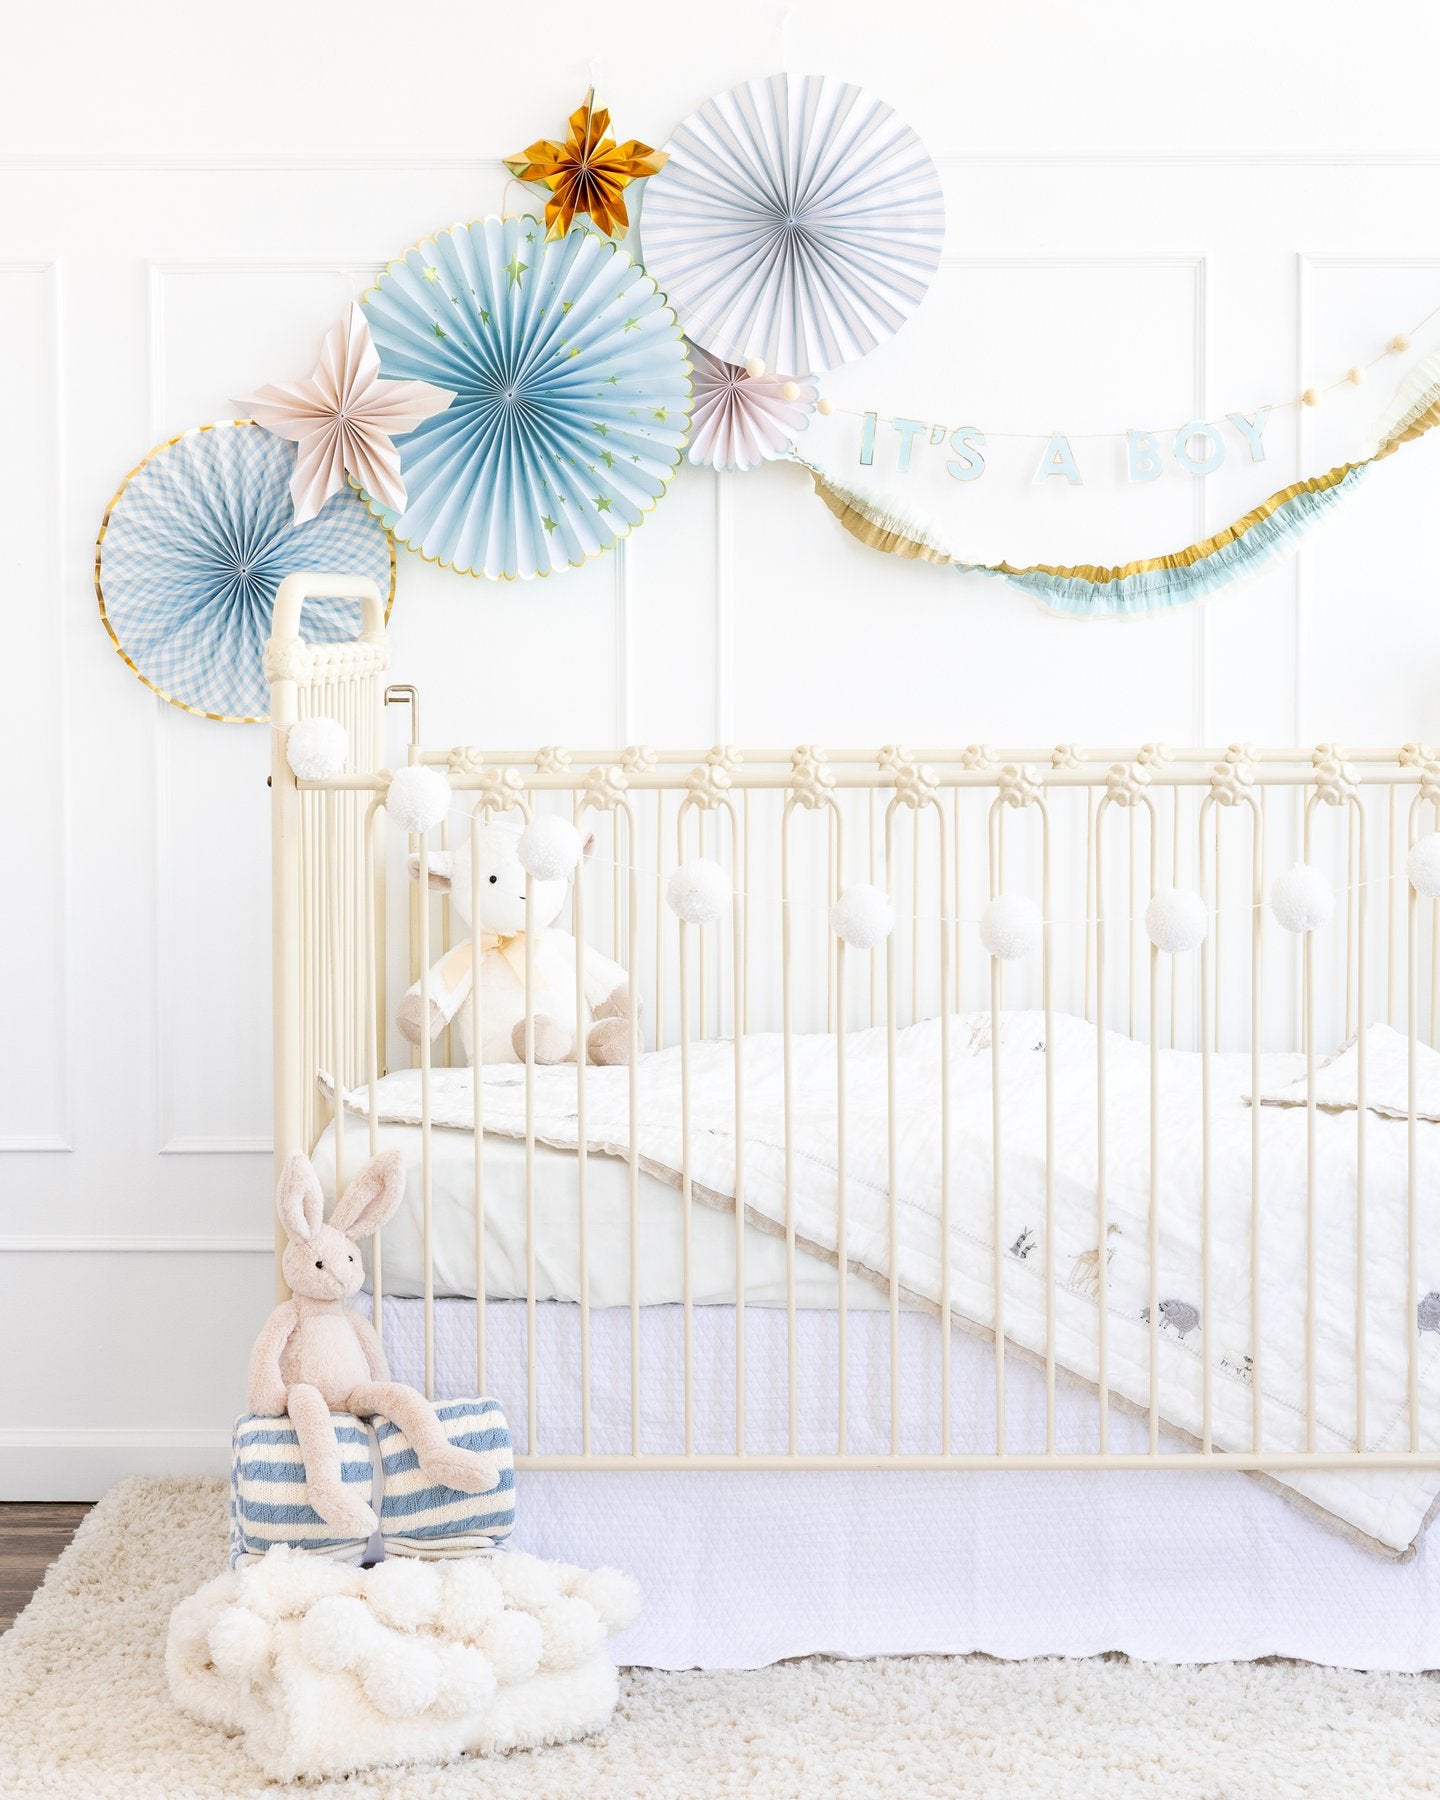 My Mind's Eye Baby Blue Fans set with 5 different shape of fans hanging above a white baby cot